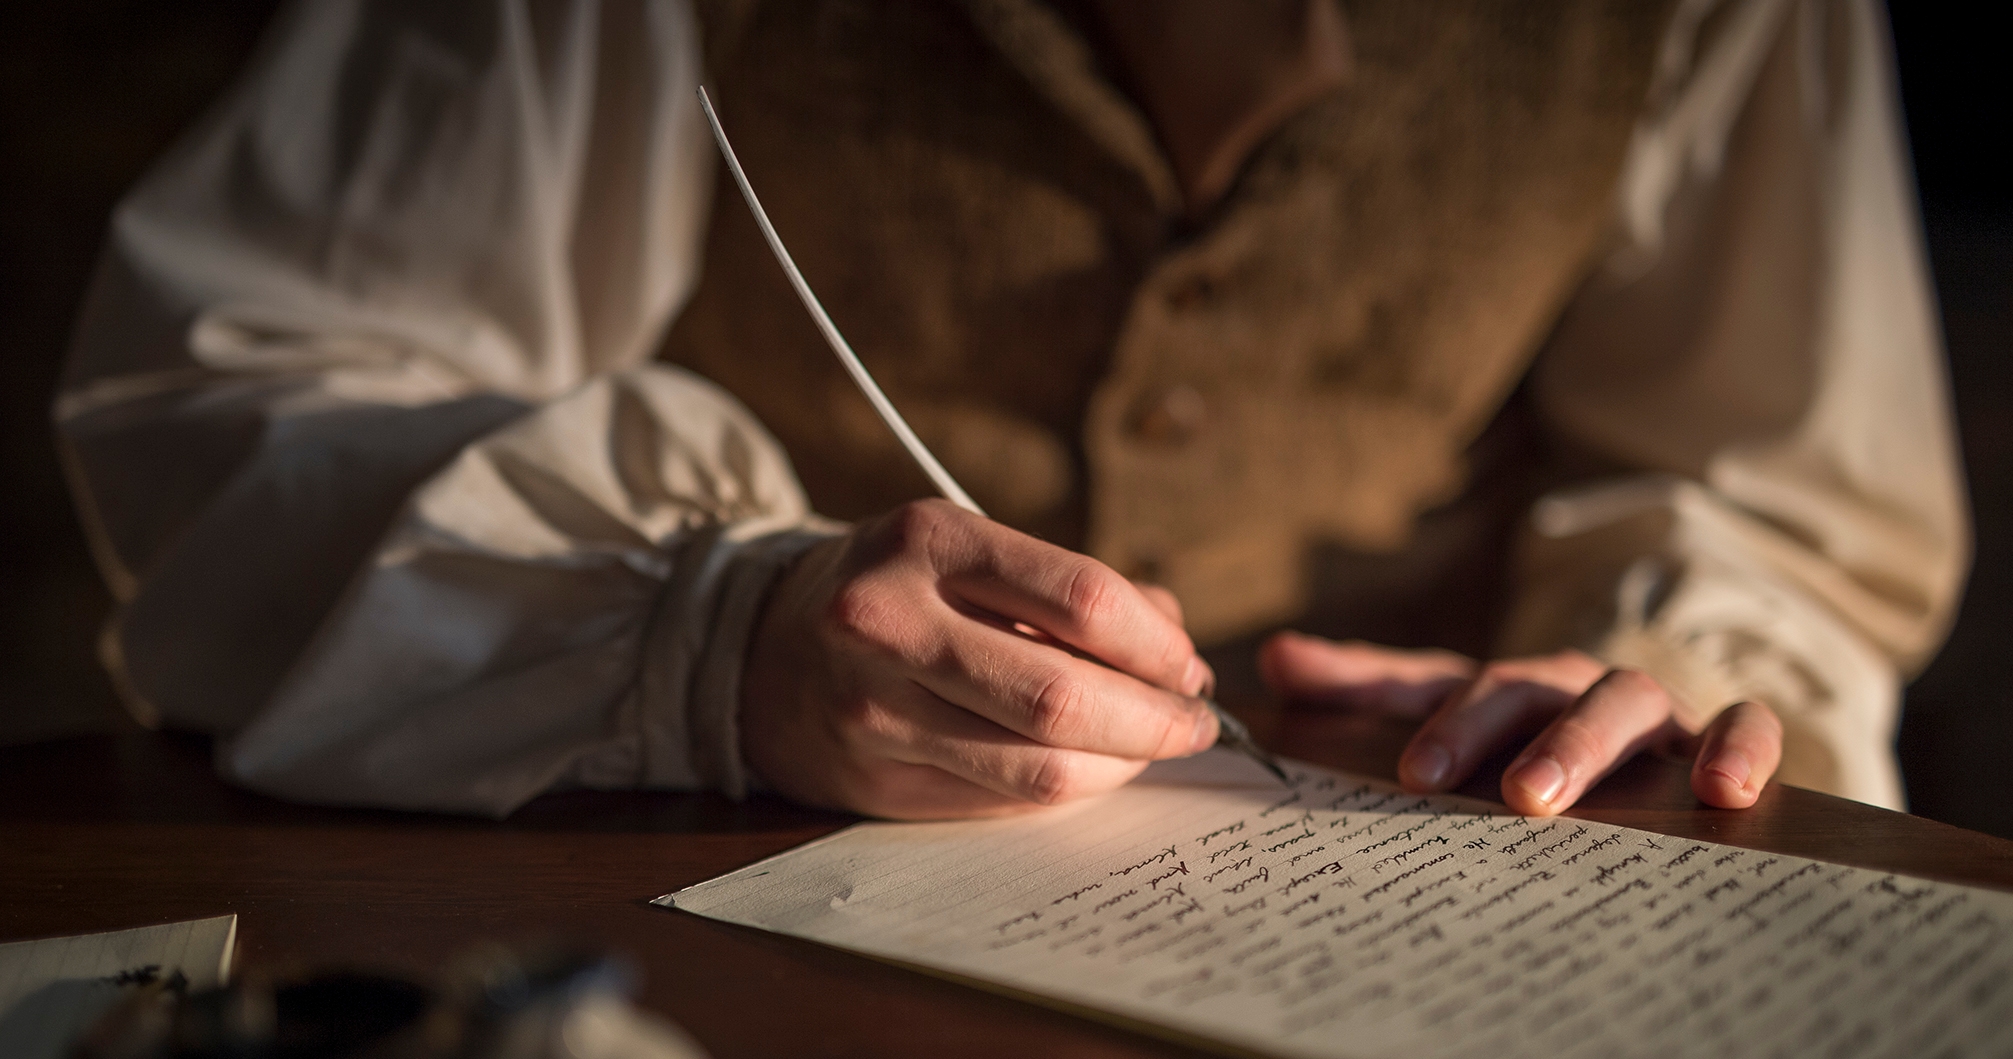 Image of Joseph Smith dictating a letter as scribe Oliver Cowdery writes with quil pen.